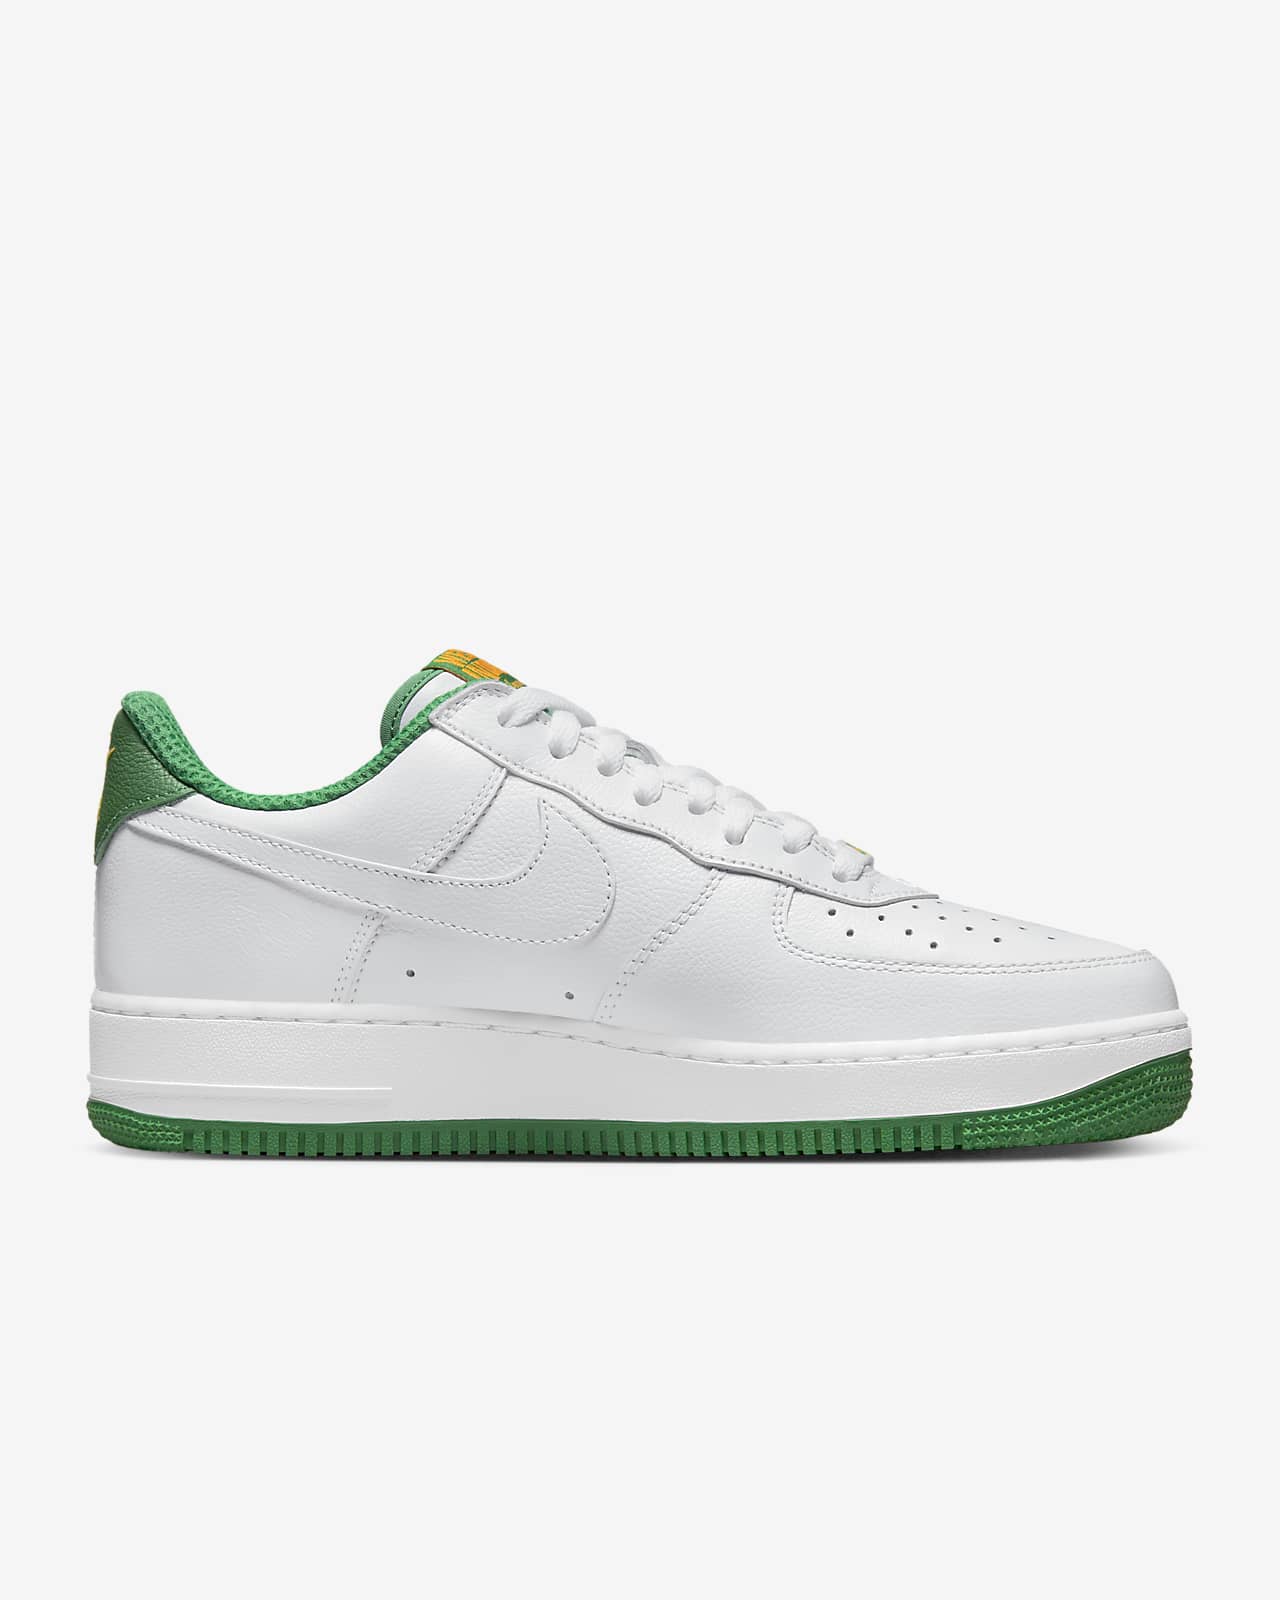 Nike Force One Hombre | sites.unimi.it